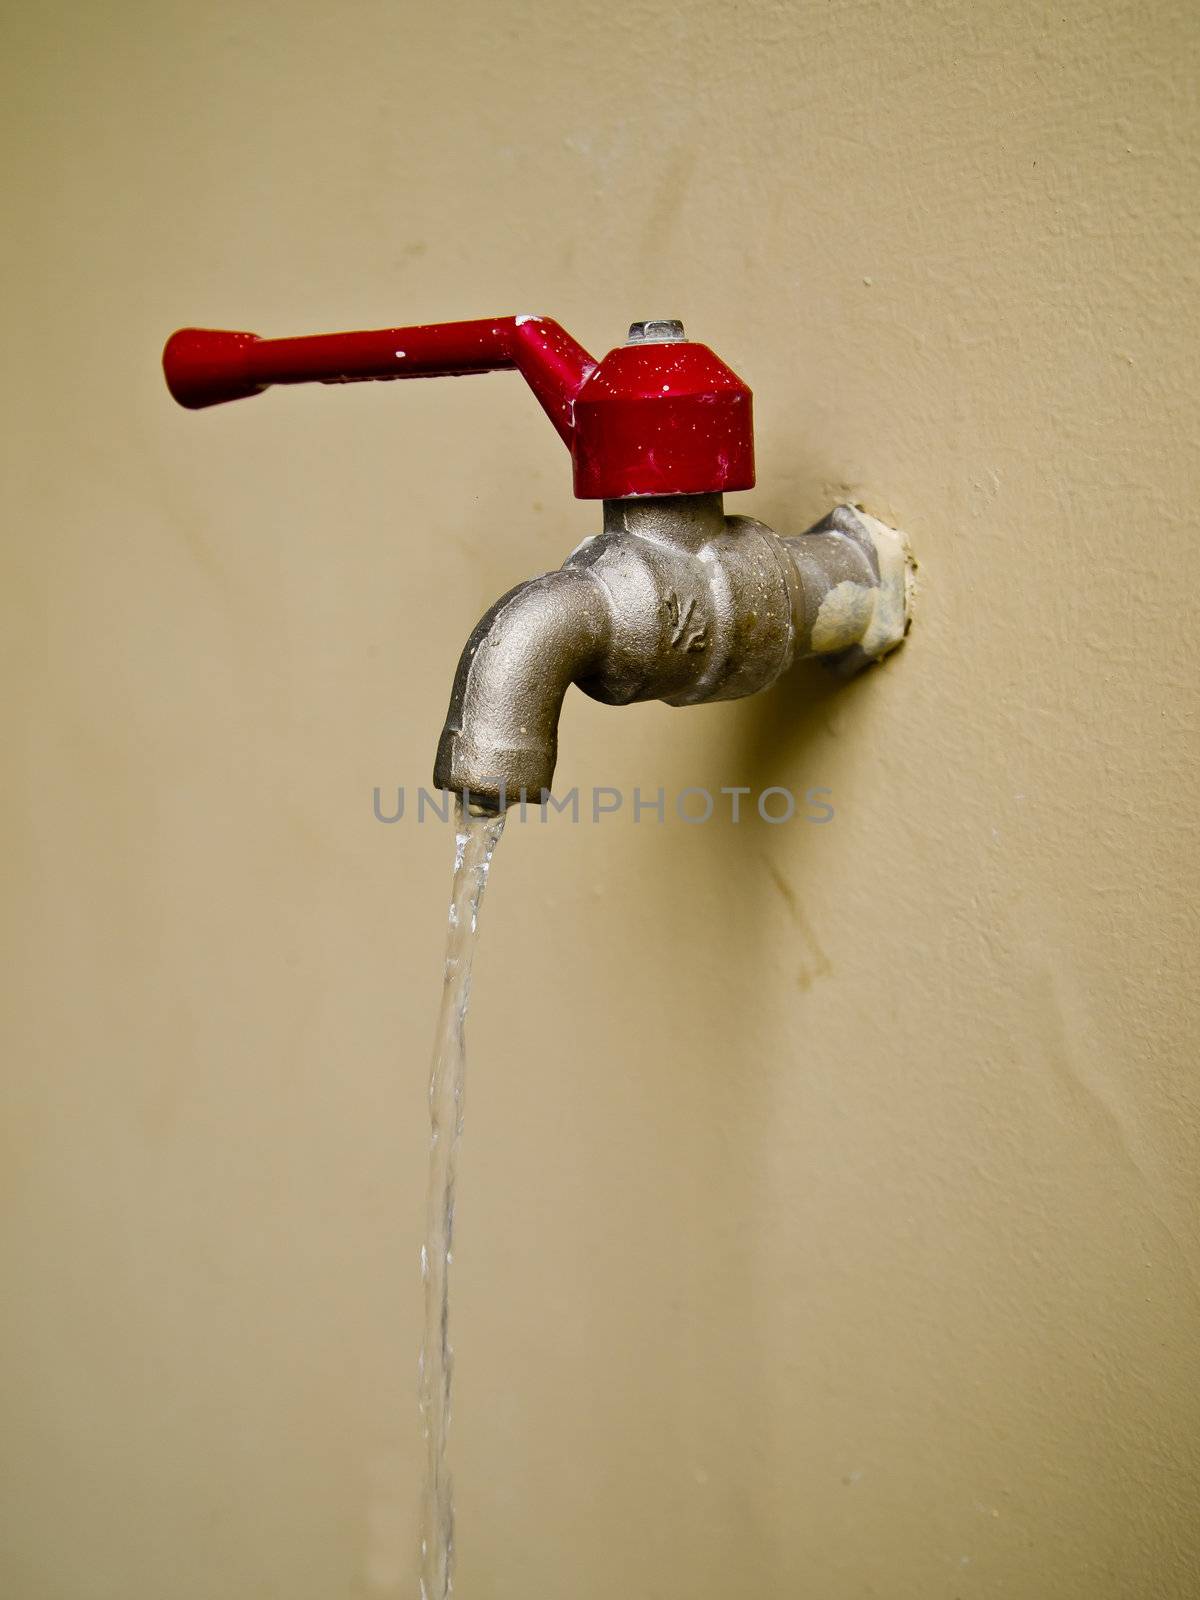 Red water tap on wall.jpg